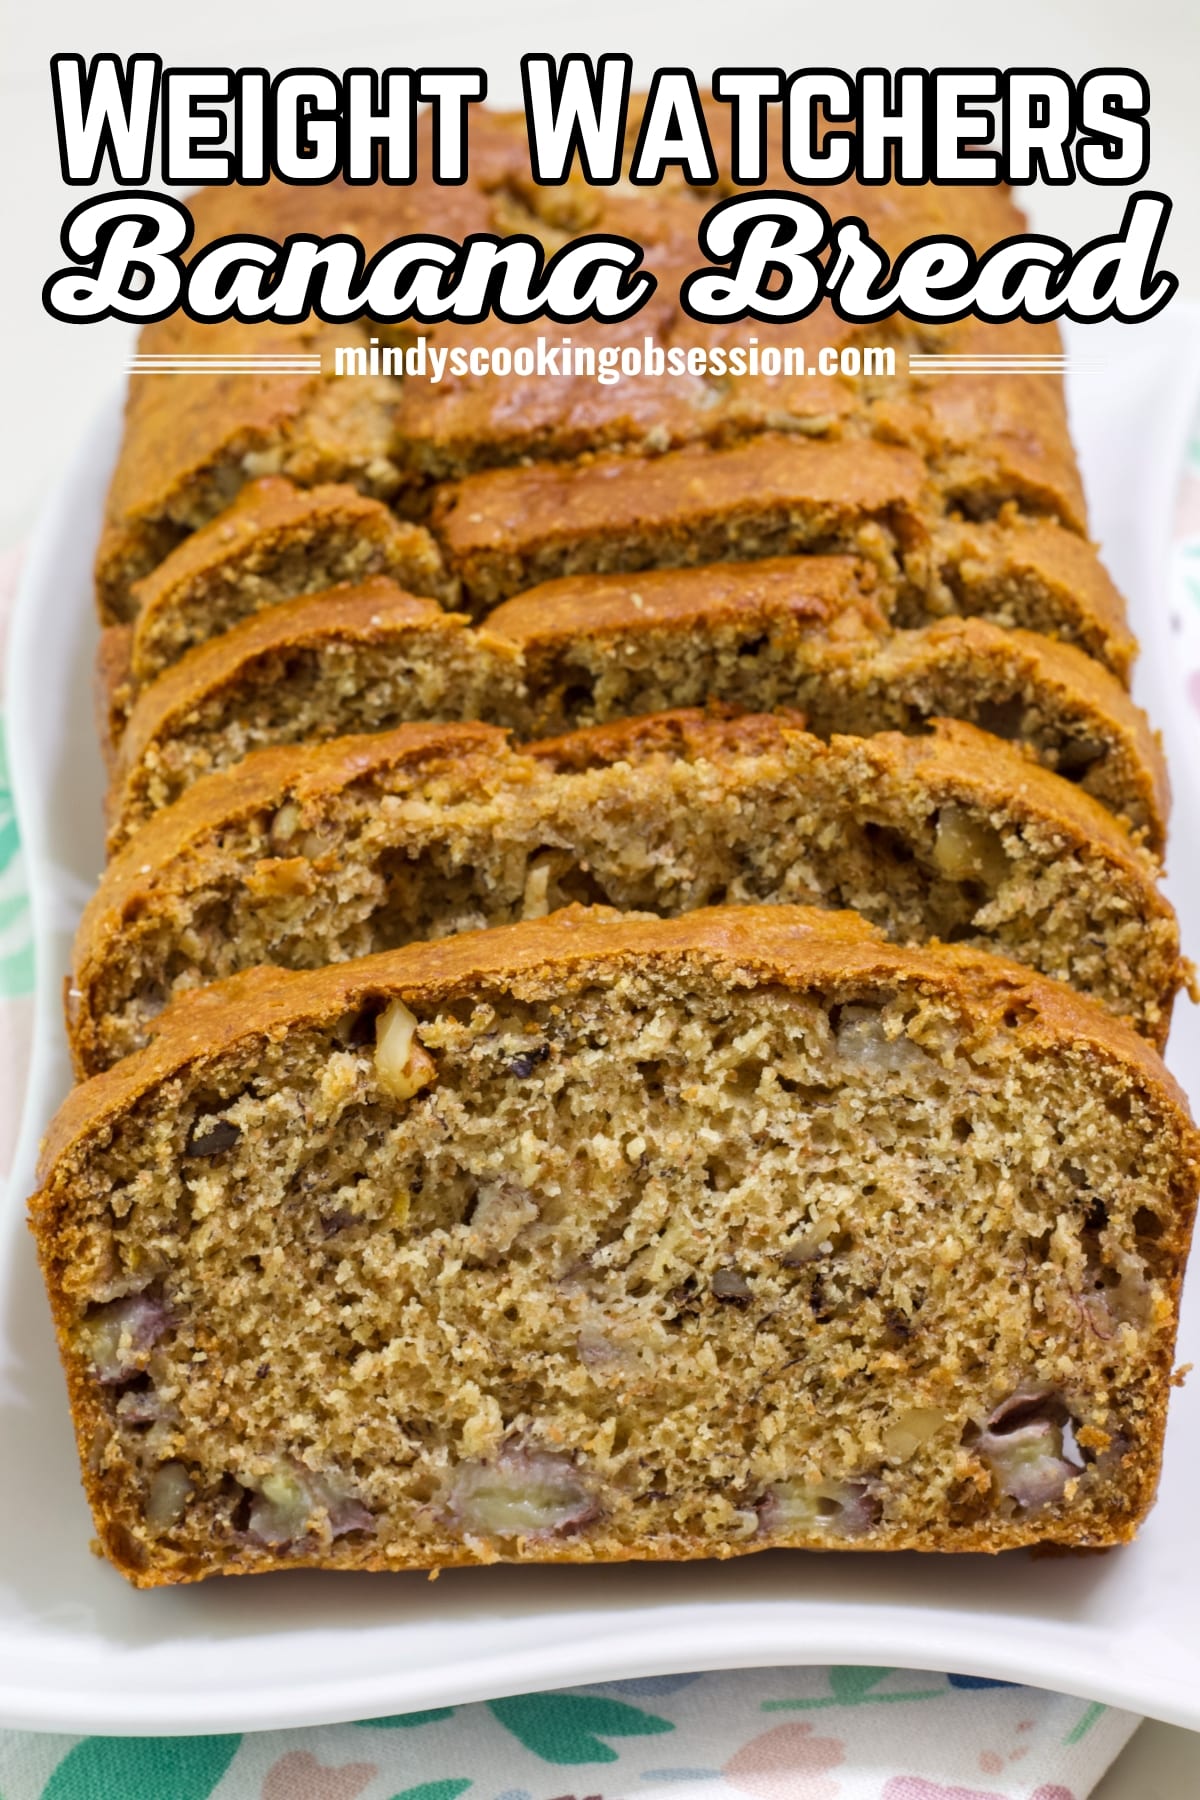 The Best WW (Weight Watchers) Banana Bread Recipe is a healthy version of this classic comfort food. It's super moist and very flavorful! Perfect for breakfast, brunch, a quick snack or healthy dessert. So easy to make using common pantry ingredients, we make it just like Weight Watchers version with whole wheat flour, less fat and sugar than traditional banana nut bread. Mashed banana, pieces of banana and walnuts make it extremely tasty! via @mindyscookingobsession